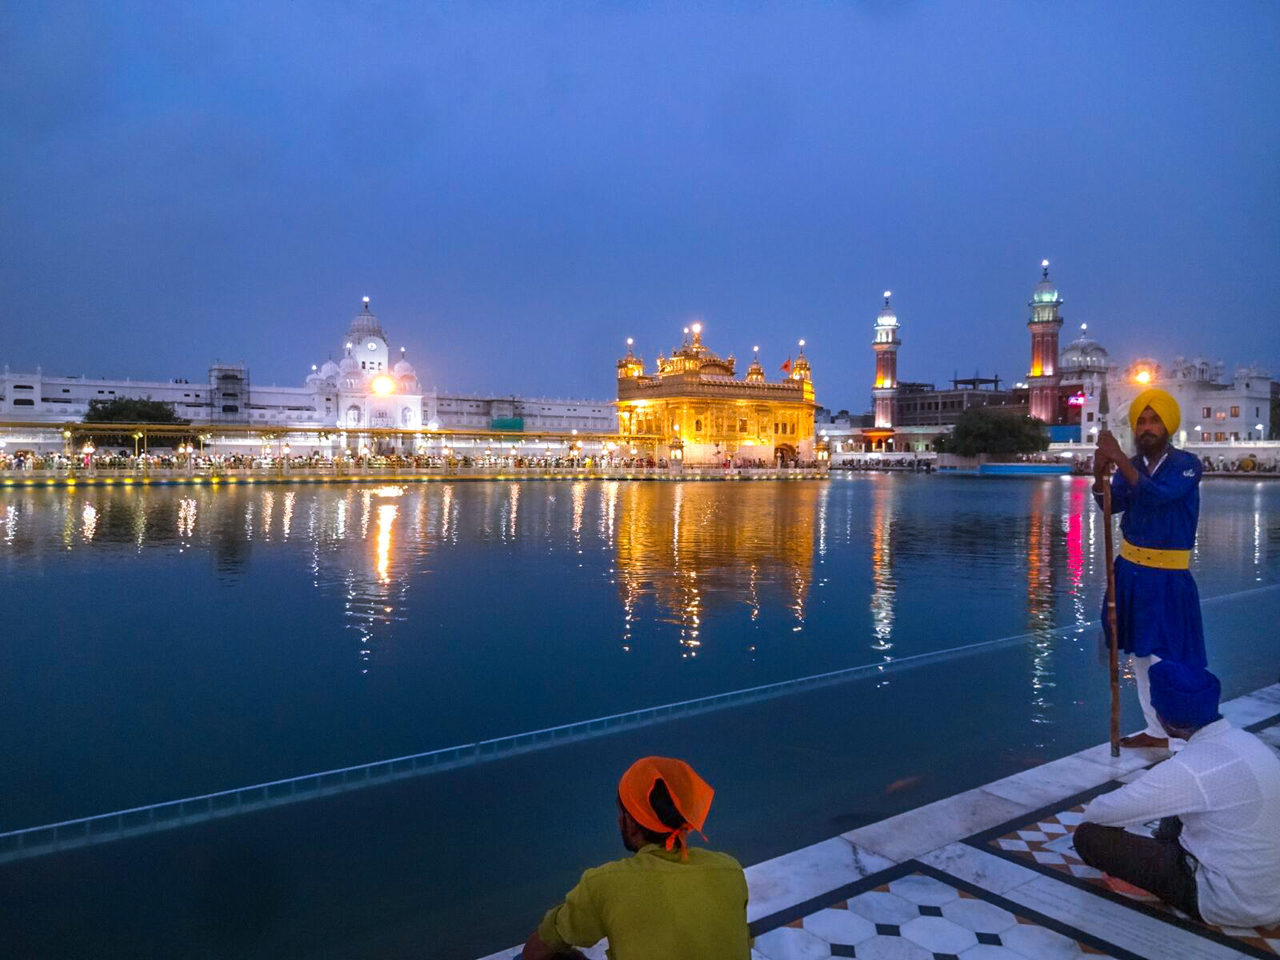 Golden Temple in Amritsar in India